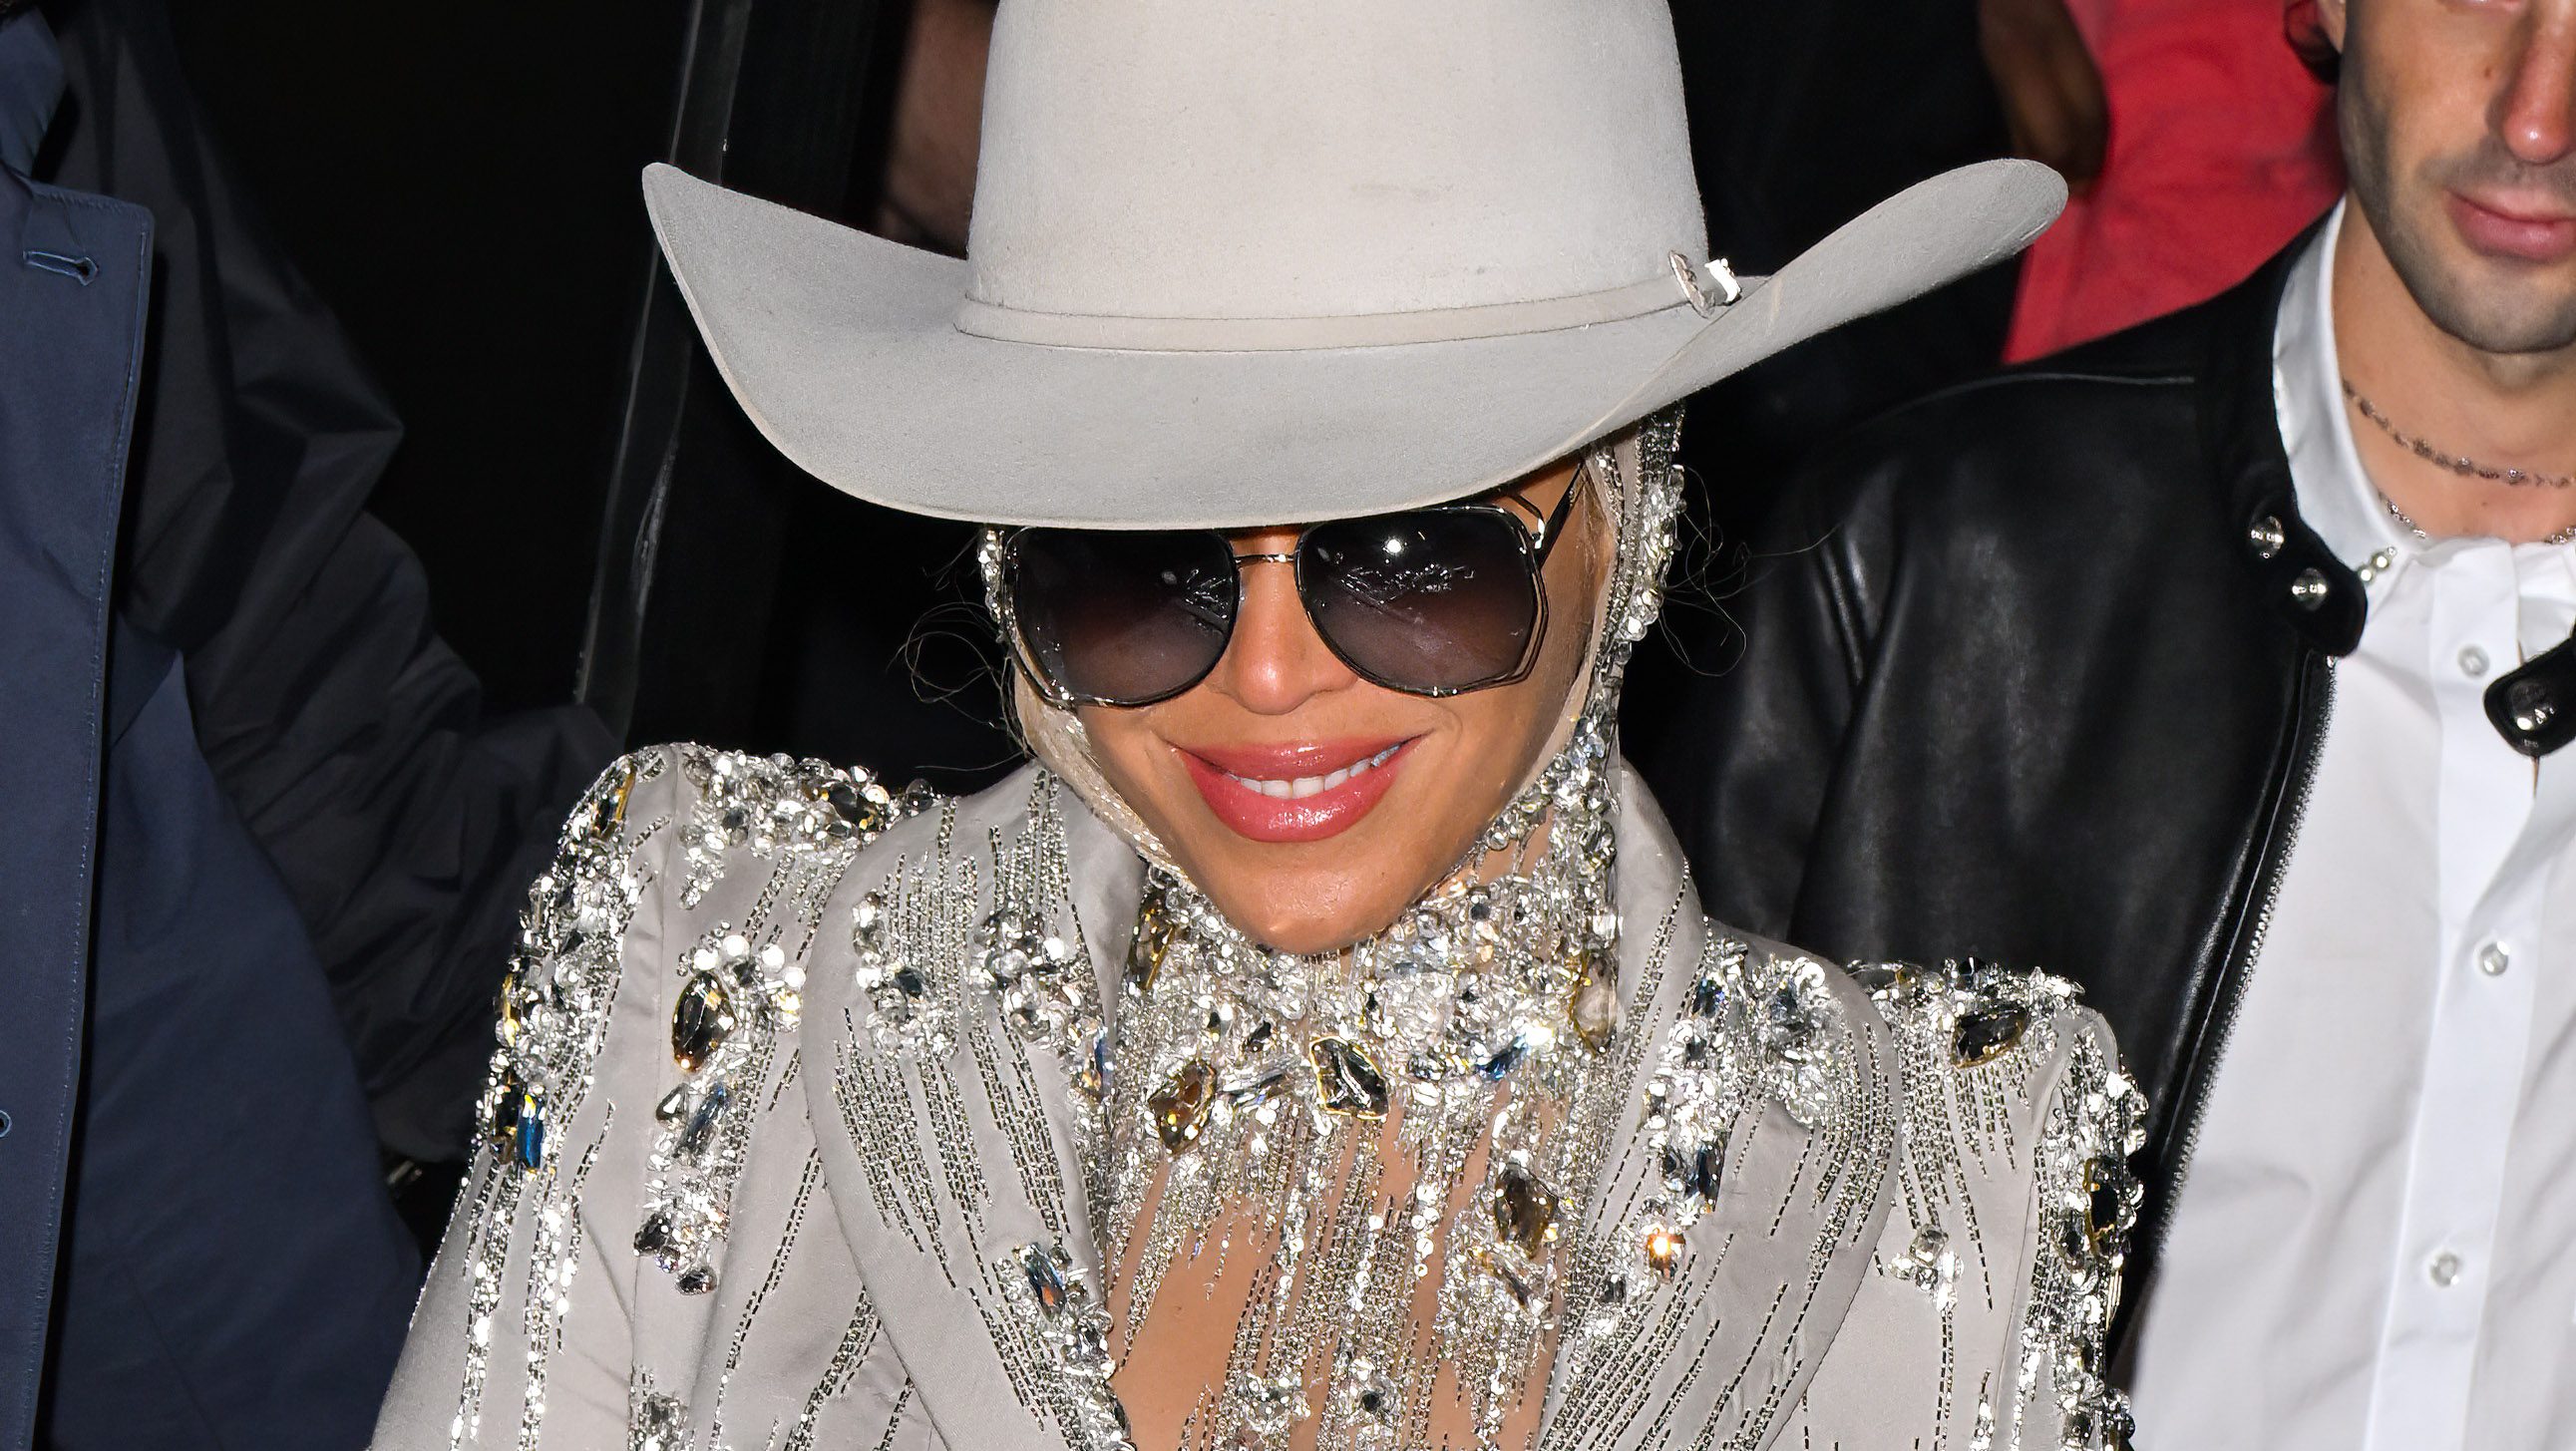 Dolly Parton shares Beyoncé may have covered her classic country hit on ‘Act II’